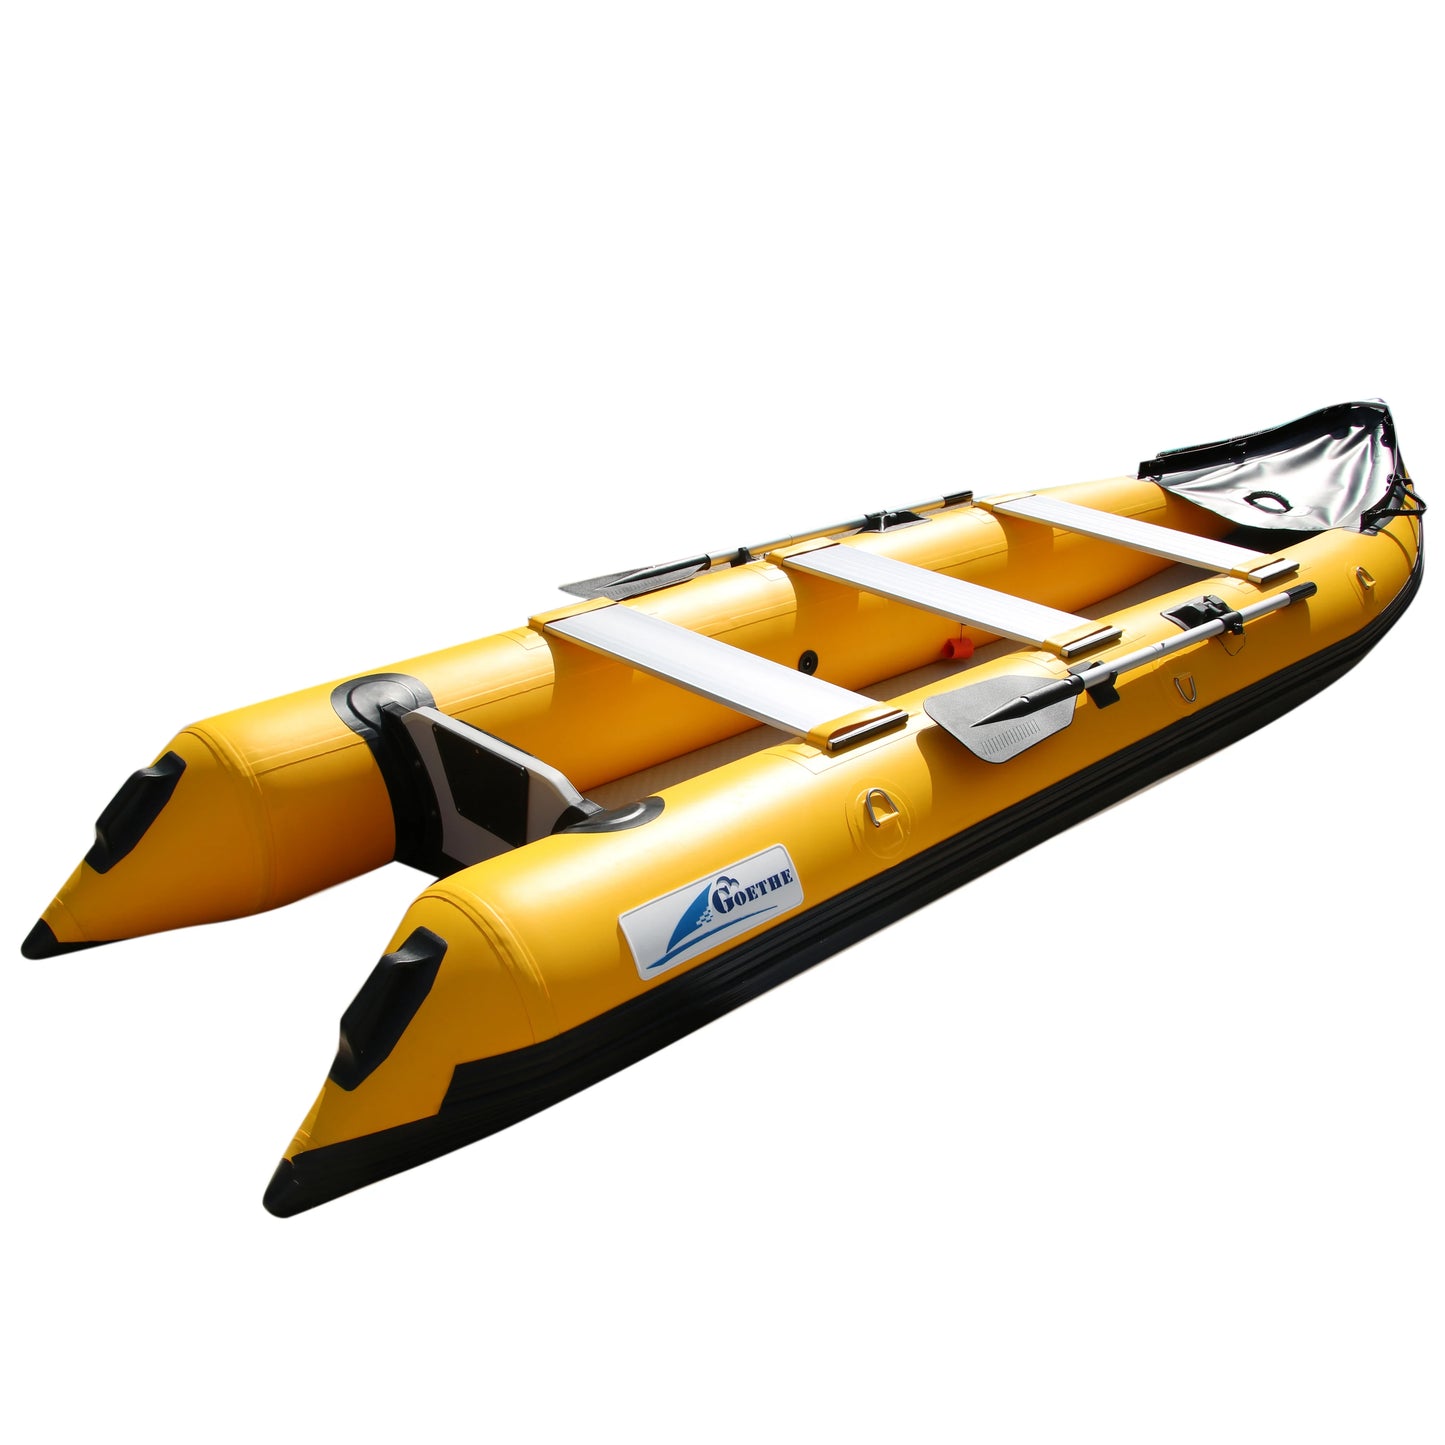 Goboat GTK370 Inflatable Boat Carp Fishing Kayak CE Outdoor Bluewater 2 Persons Drifting Rowing Camping Equipment